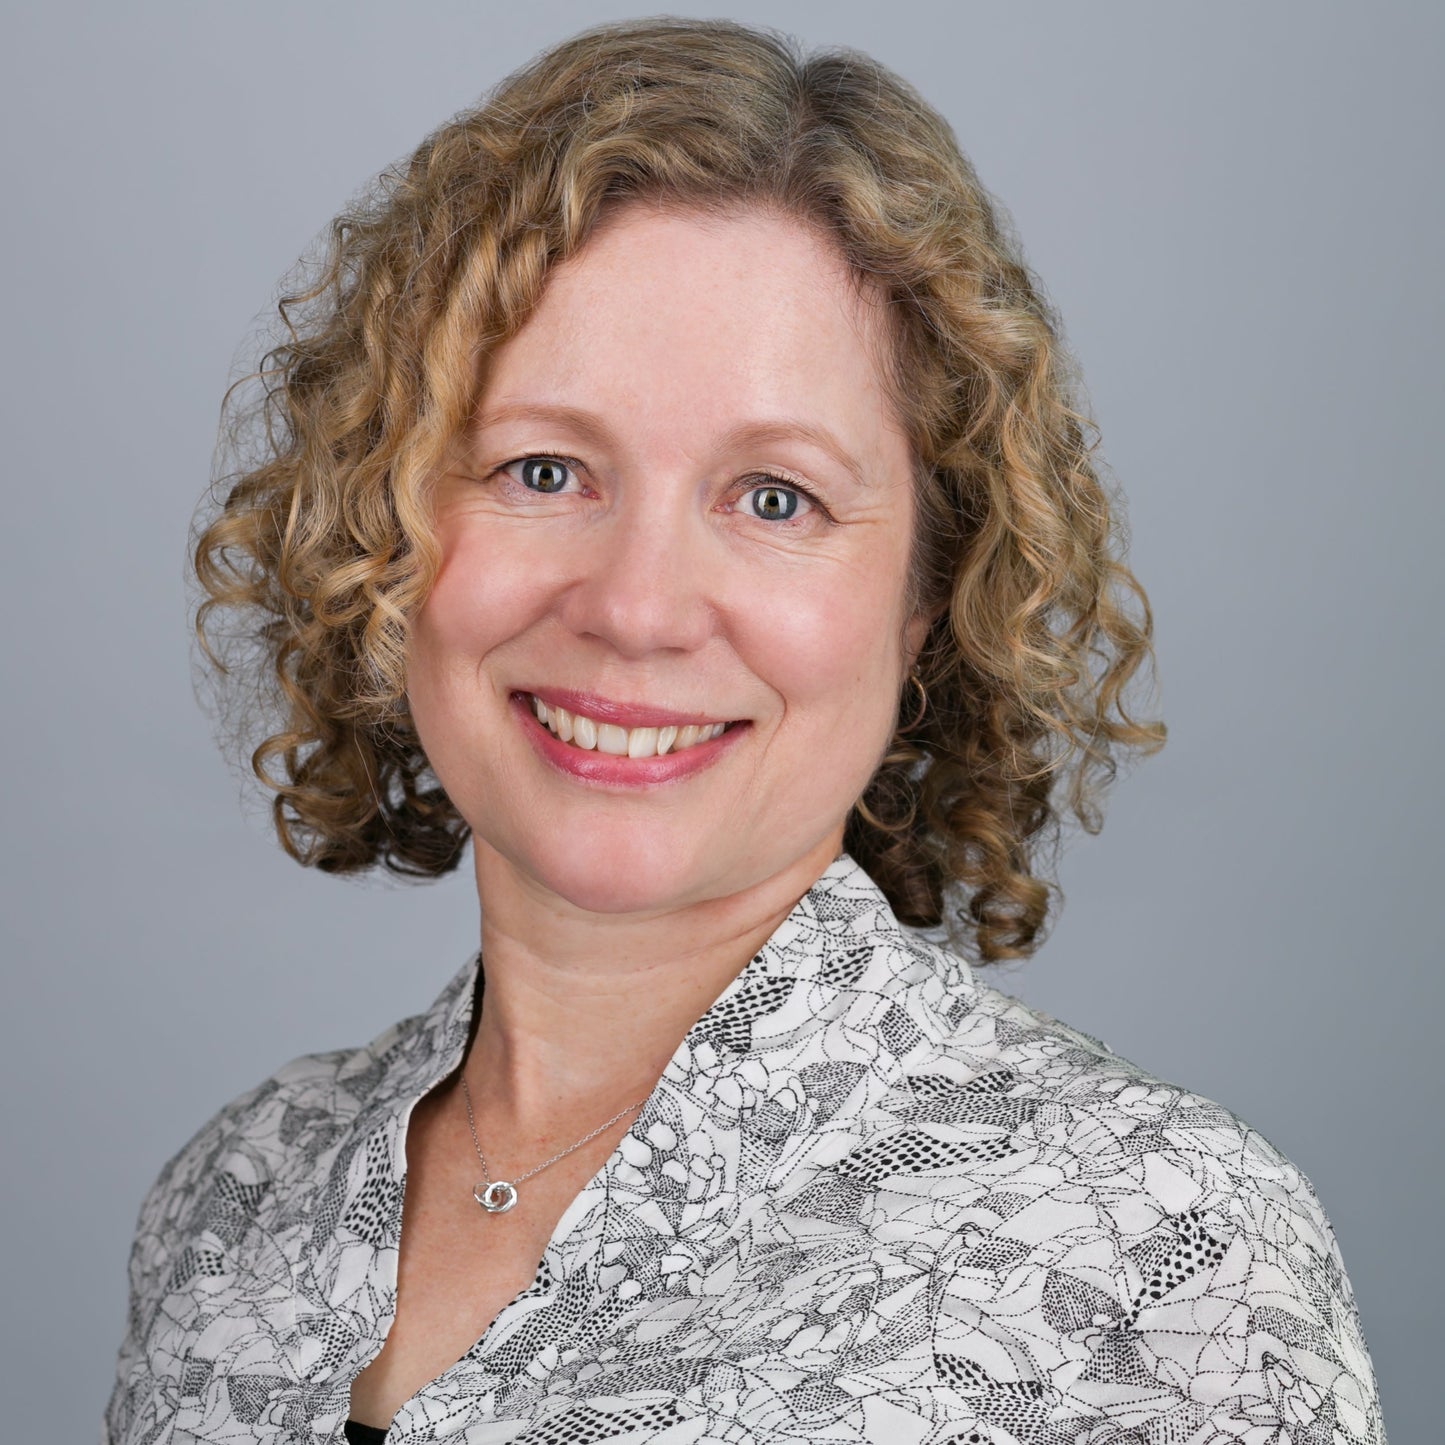 Photo of Jayne Russell maker of Nom Nom Skincare products for babies, pregnancy and everybody. Jayne has a curly blonde bob and it wearing a black and white graphic printed blouse set against a warm grey background